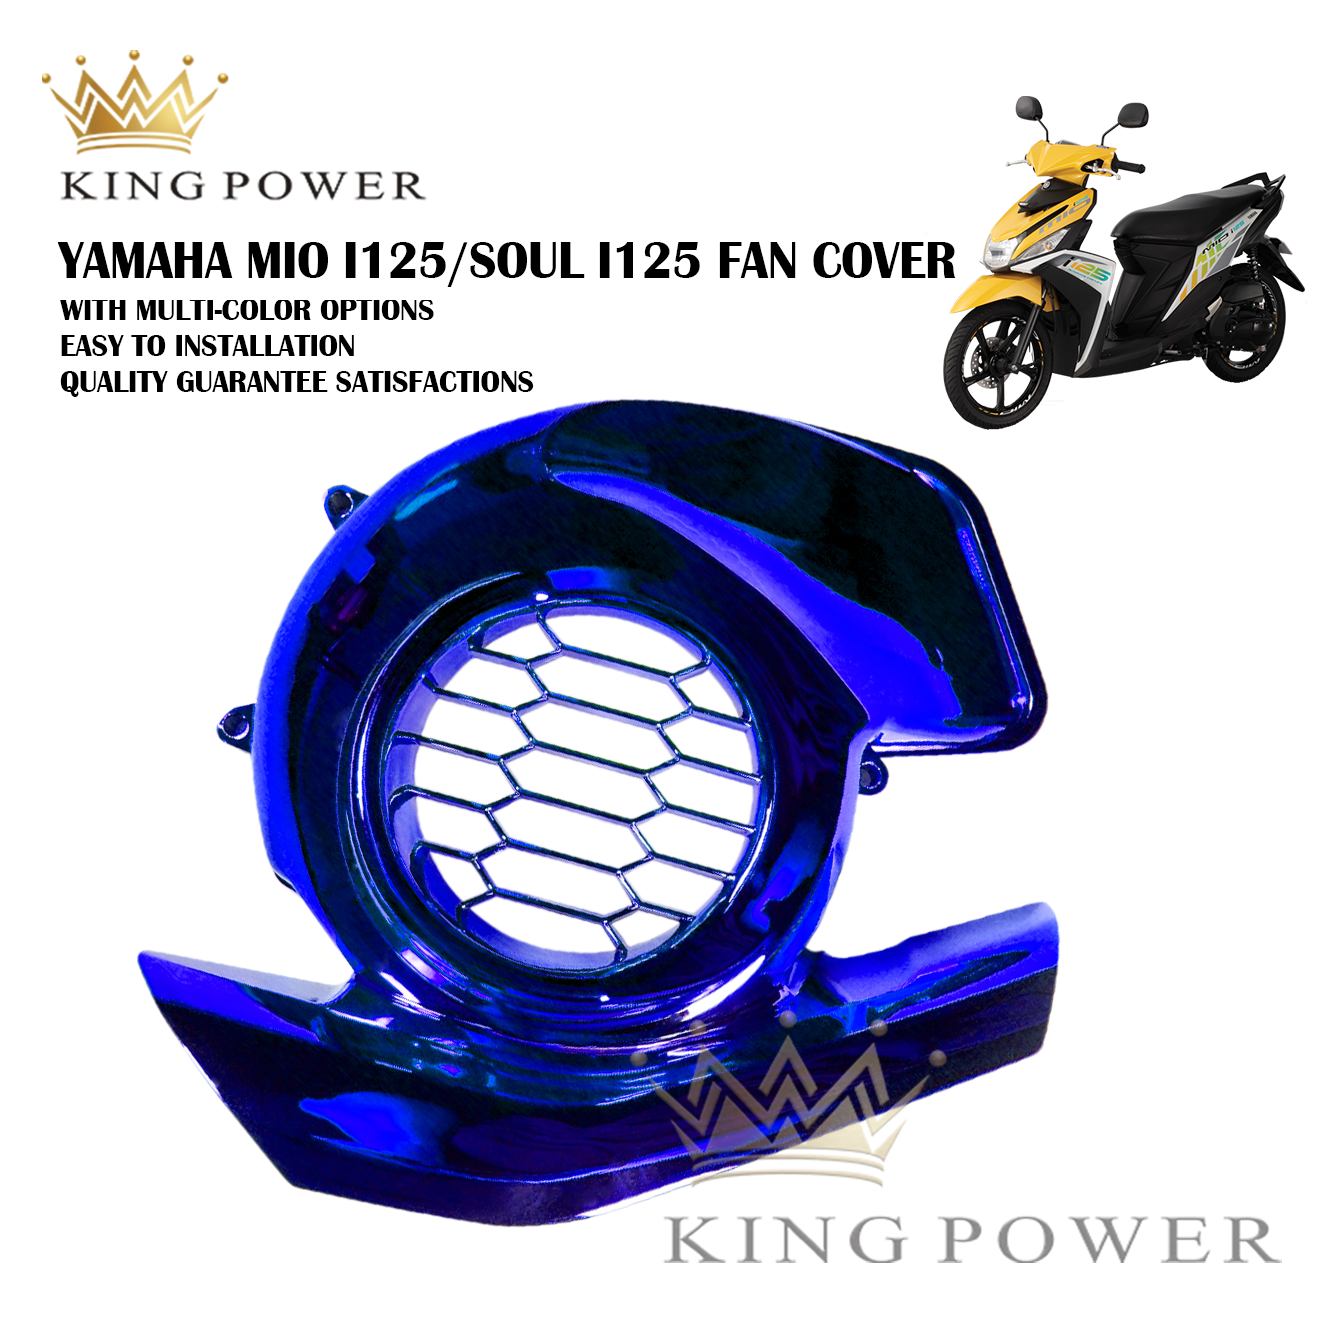 motorcycle cover for mio i 125